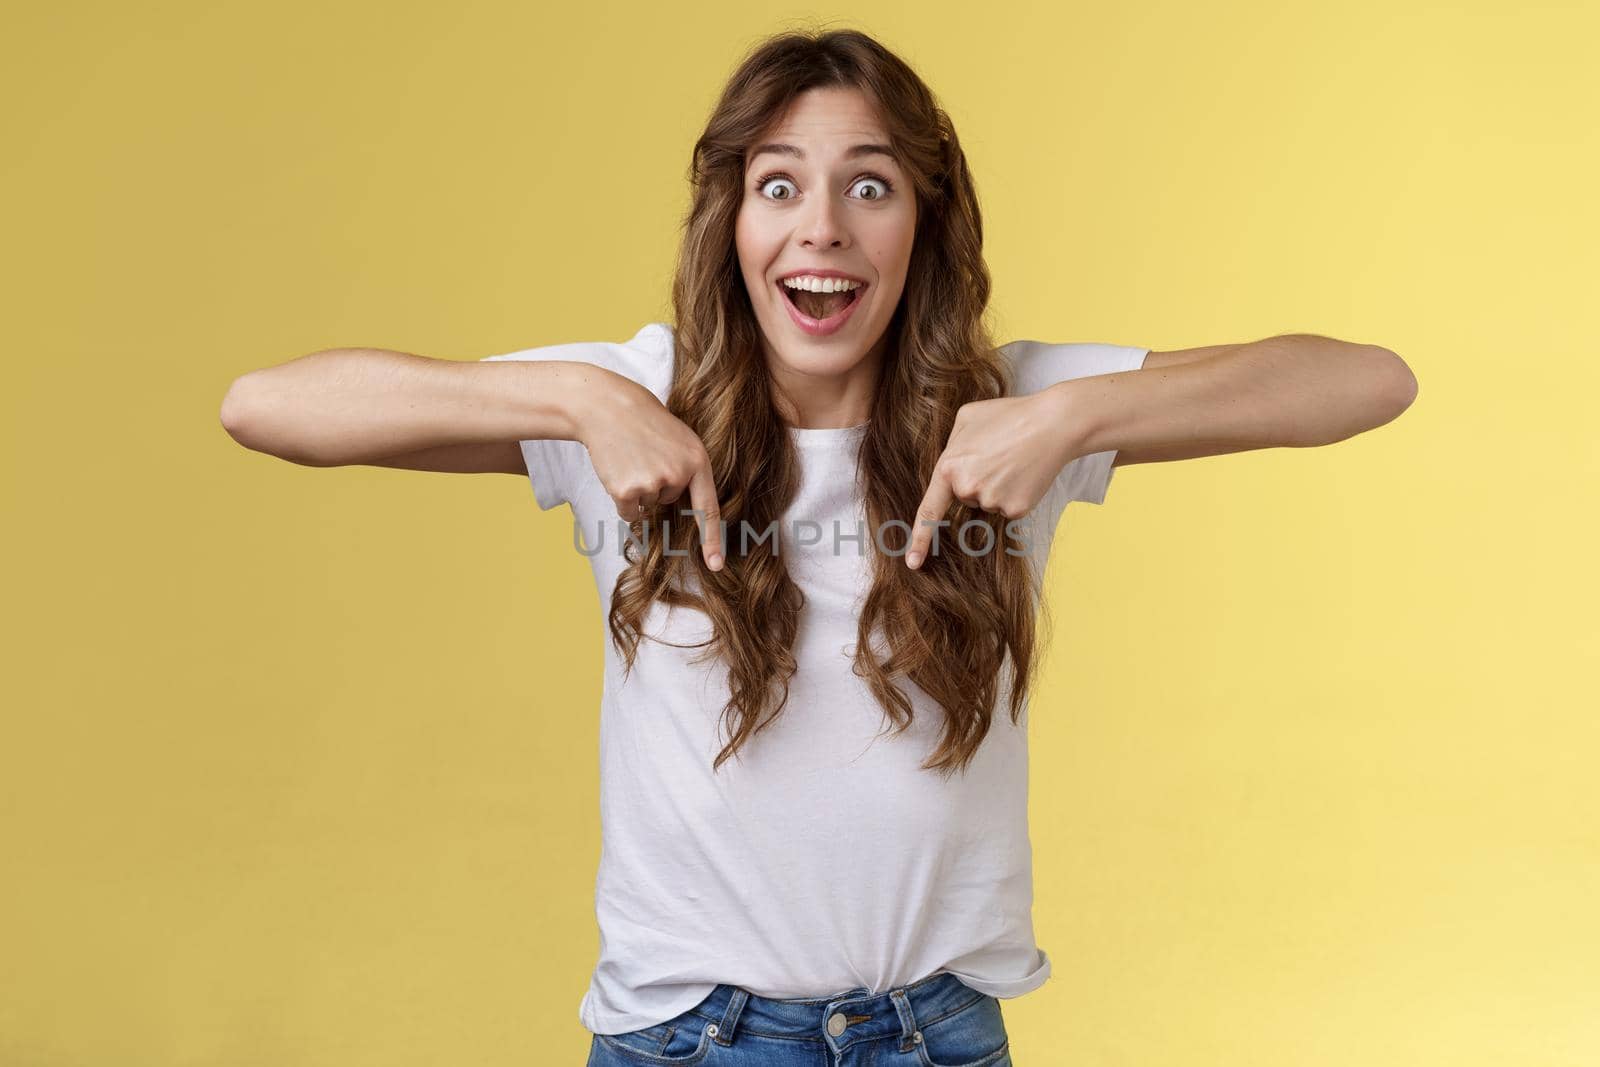 Tempting astonished impressed excited lively girl fan react stunned lose speech fascinated pointing down thrilled stare camera admiration surprise full disbelief stand yellow background.